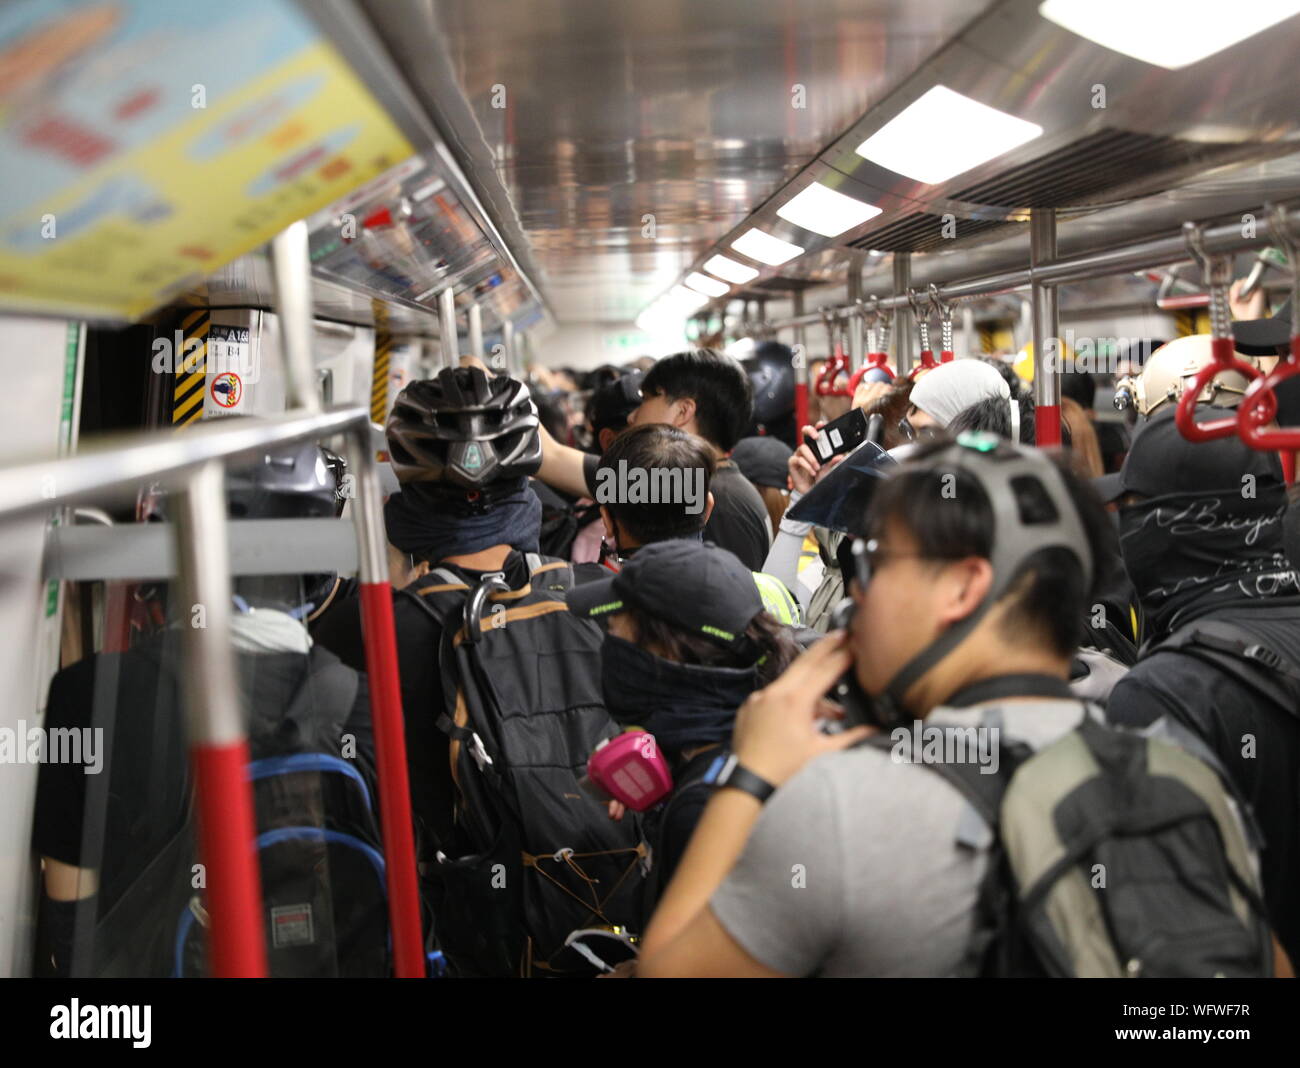 Hong Kong, China. 31st Aug, 2019. 31st August 2019. Hong Kong Anti Extradition Bill protests. After a day of many violent clashes with police. Some pro government supporters attacked a member of press on a MTR train with many pro democracy protesters who fought back. Credit: David Coulson/Alamy Live News Stock Photo